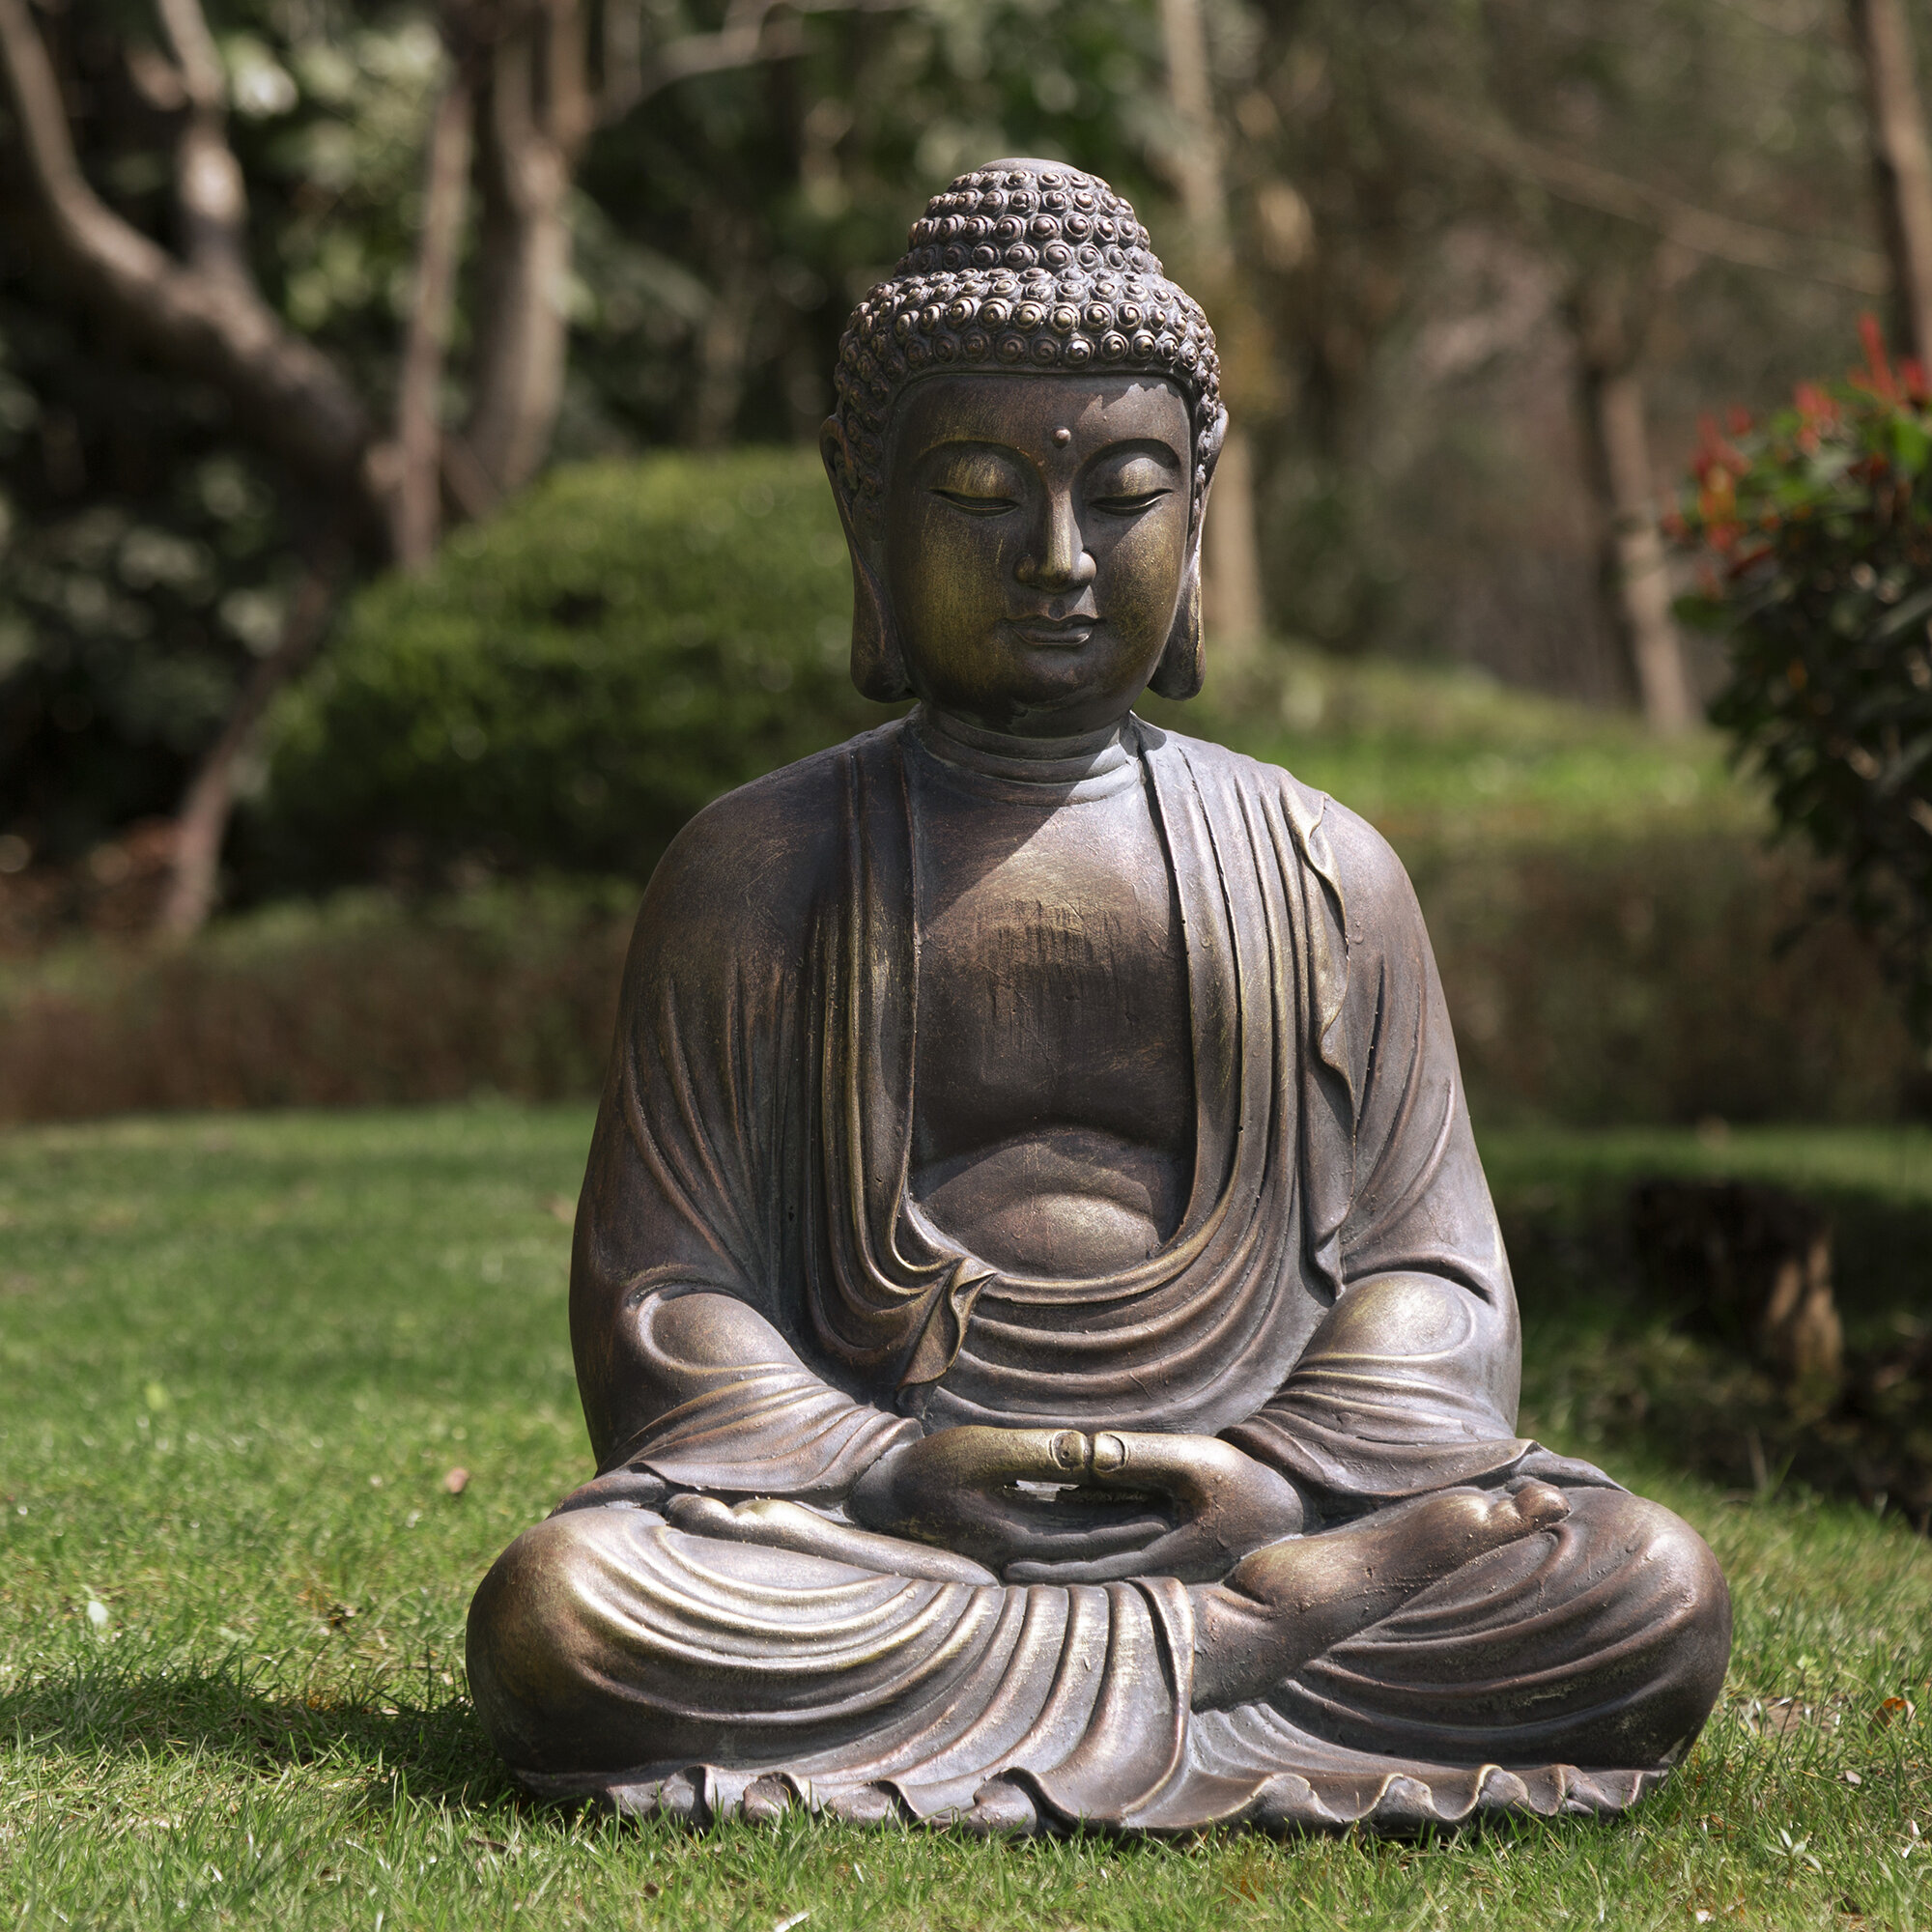 Deco 79 Polystone Buddha Meditating Sculpture with Engraved Carvings and  Relief Detailing, 12 x 6 x 15, Brown